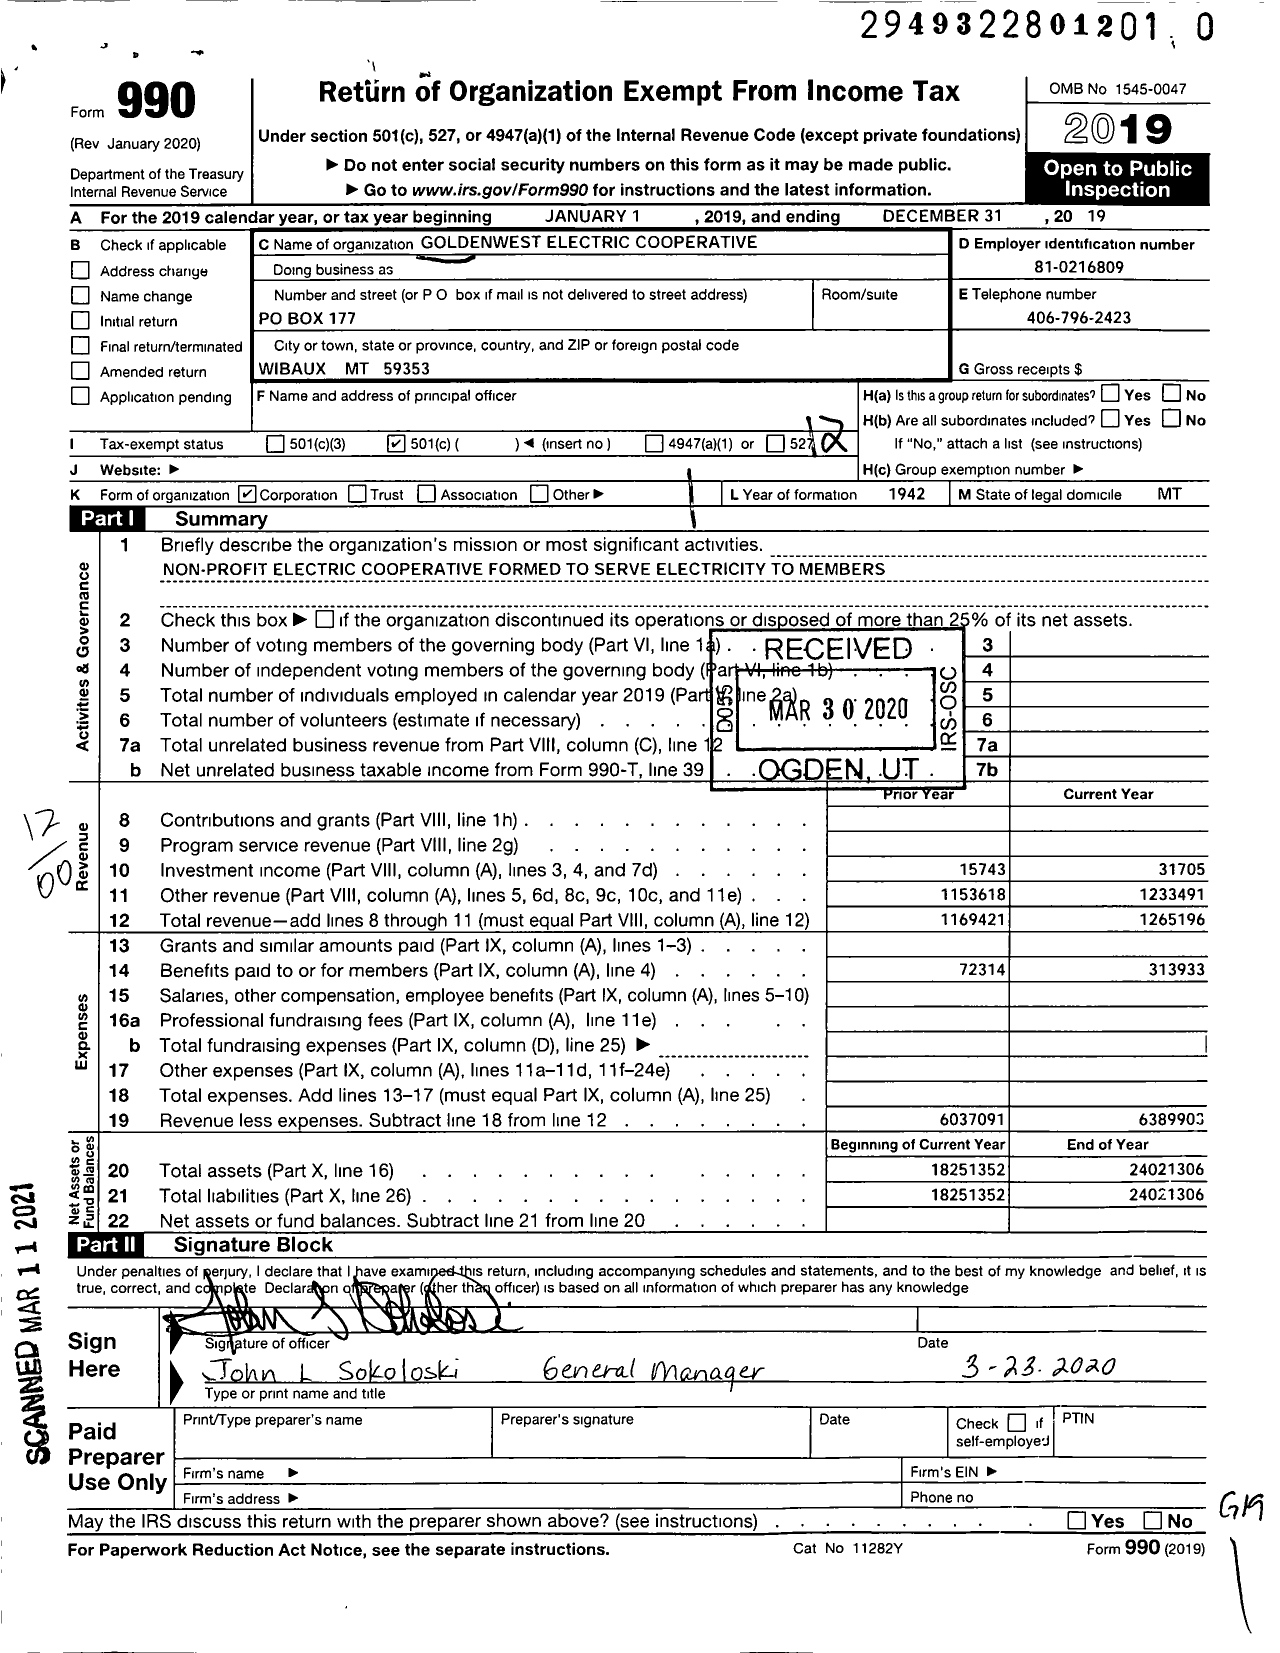 Image of first page of 2019 Form 990O for Goldenwest Electric Cooperative